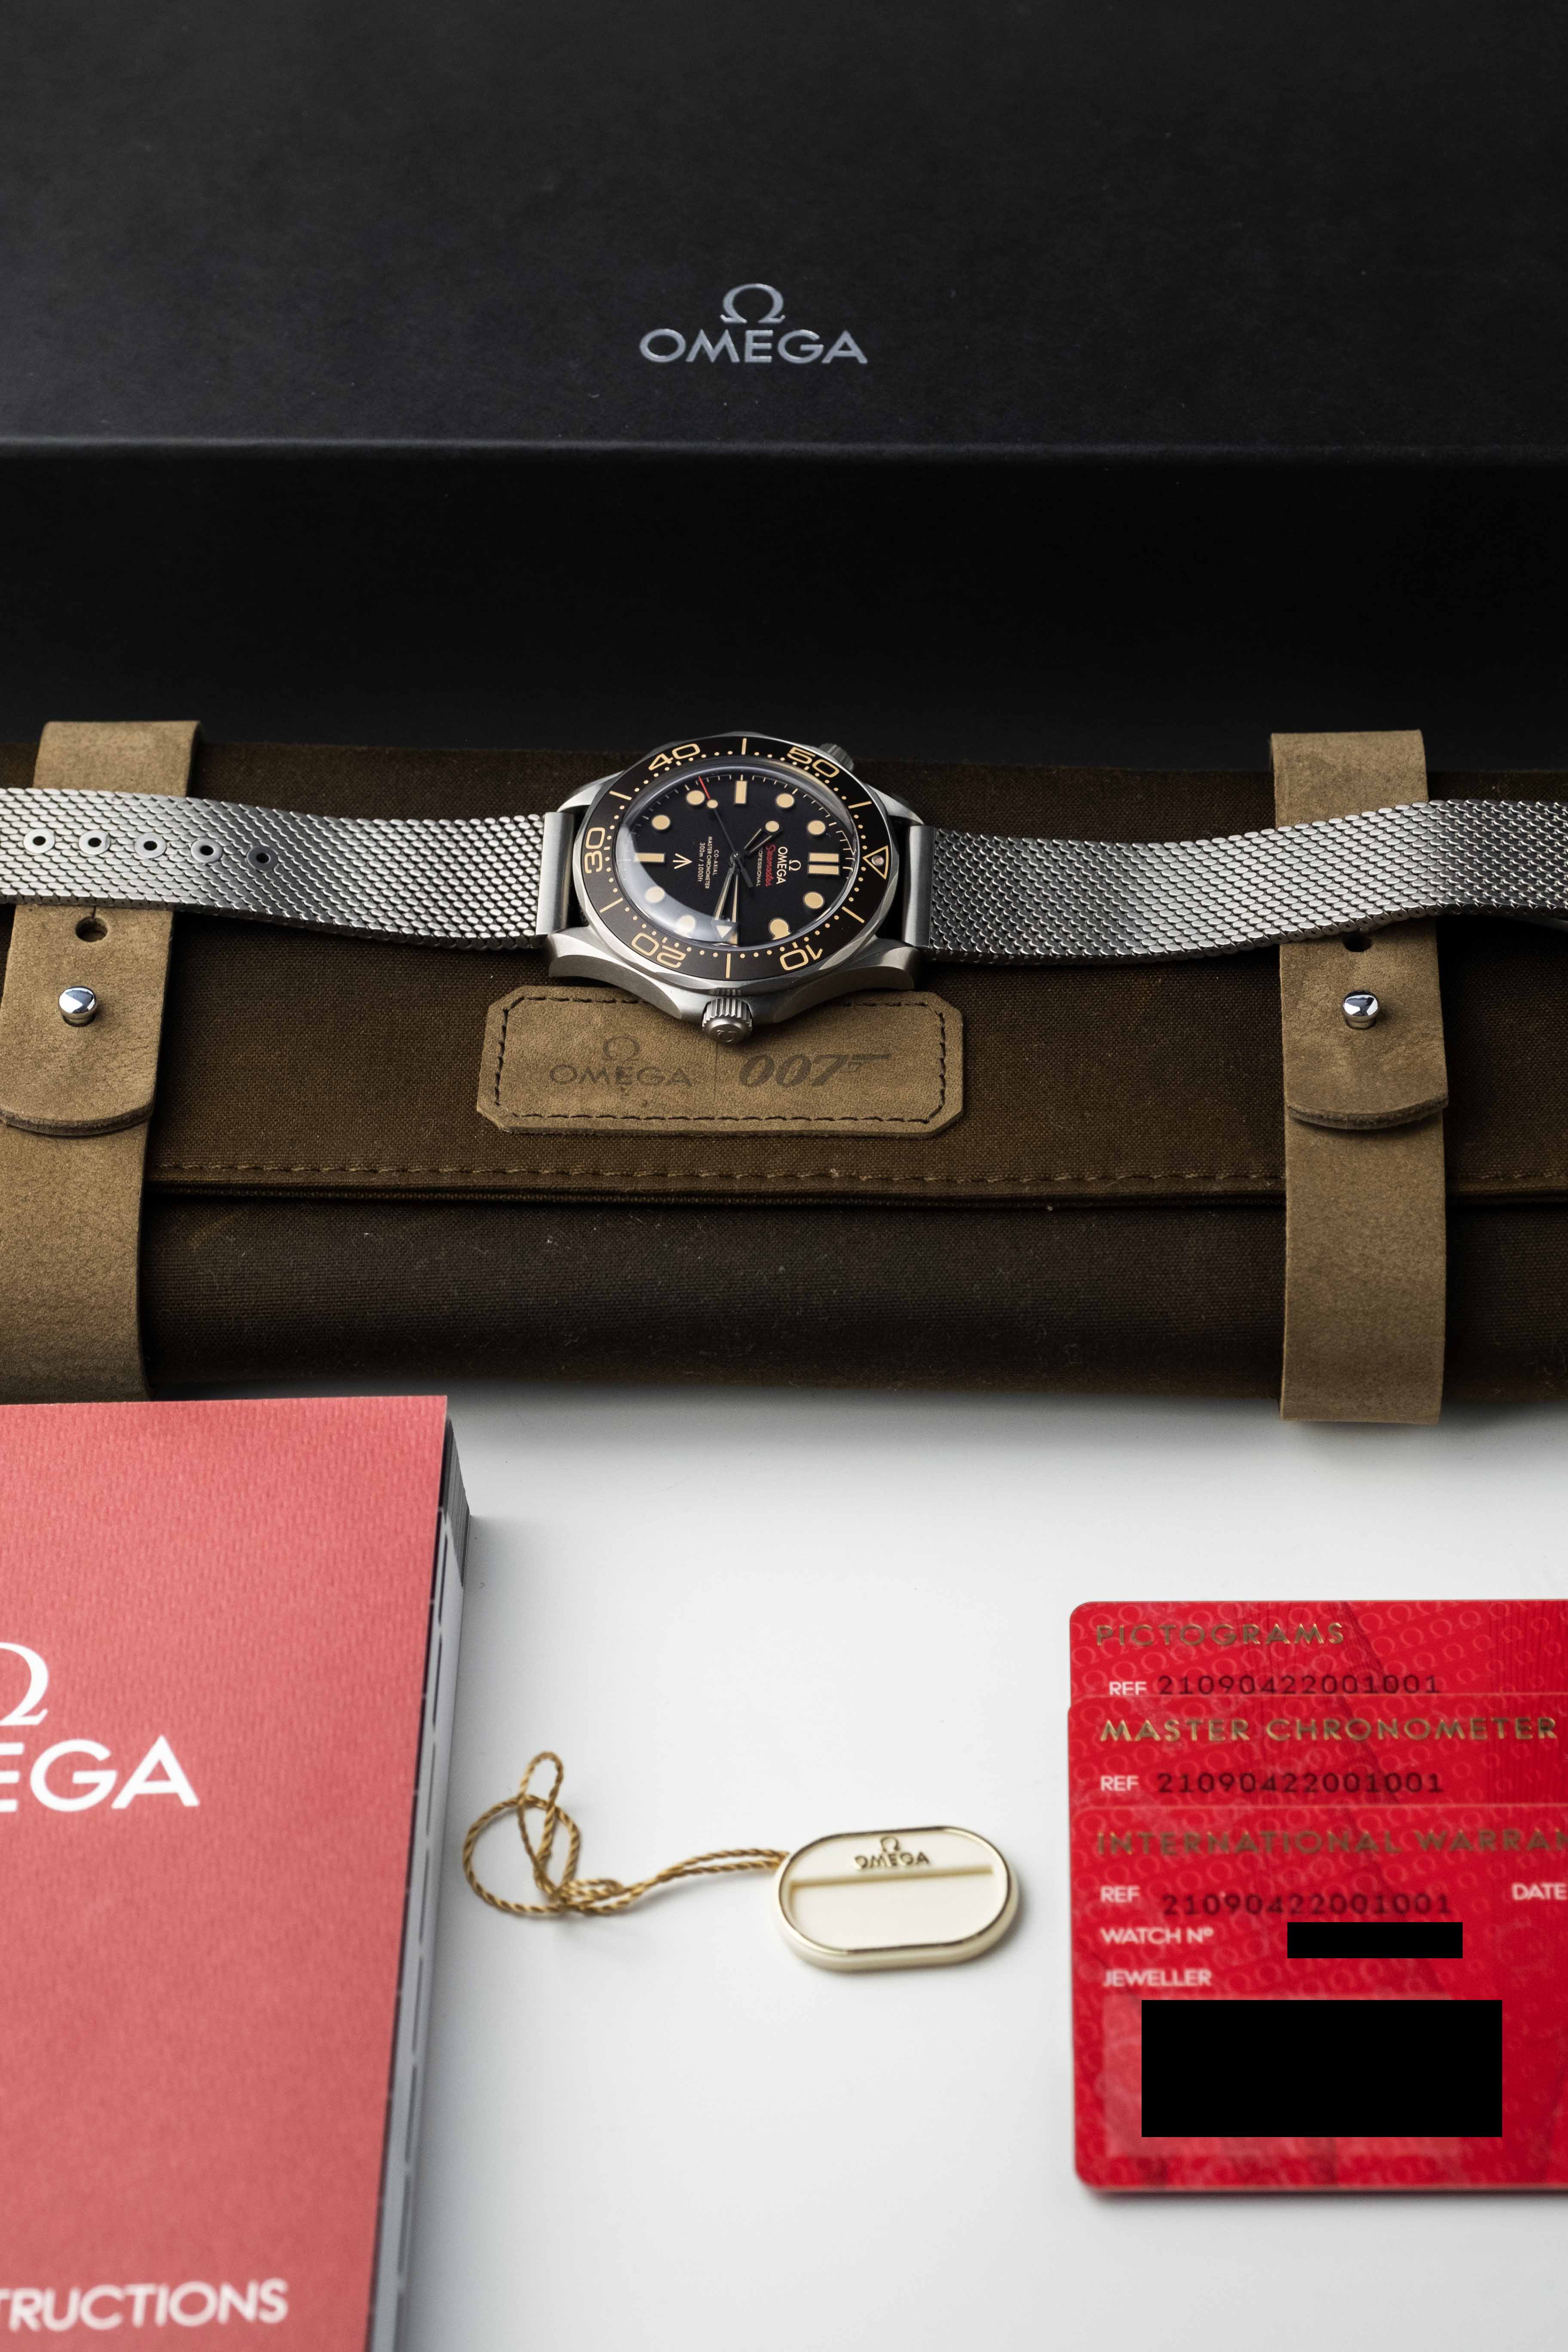 Omega Seamaster Diver 300M 'No Time To Die' Ref. 210.90.42.20.01.001 w/ Box & Papers 2021